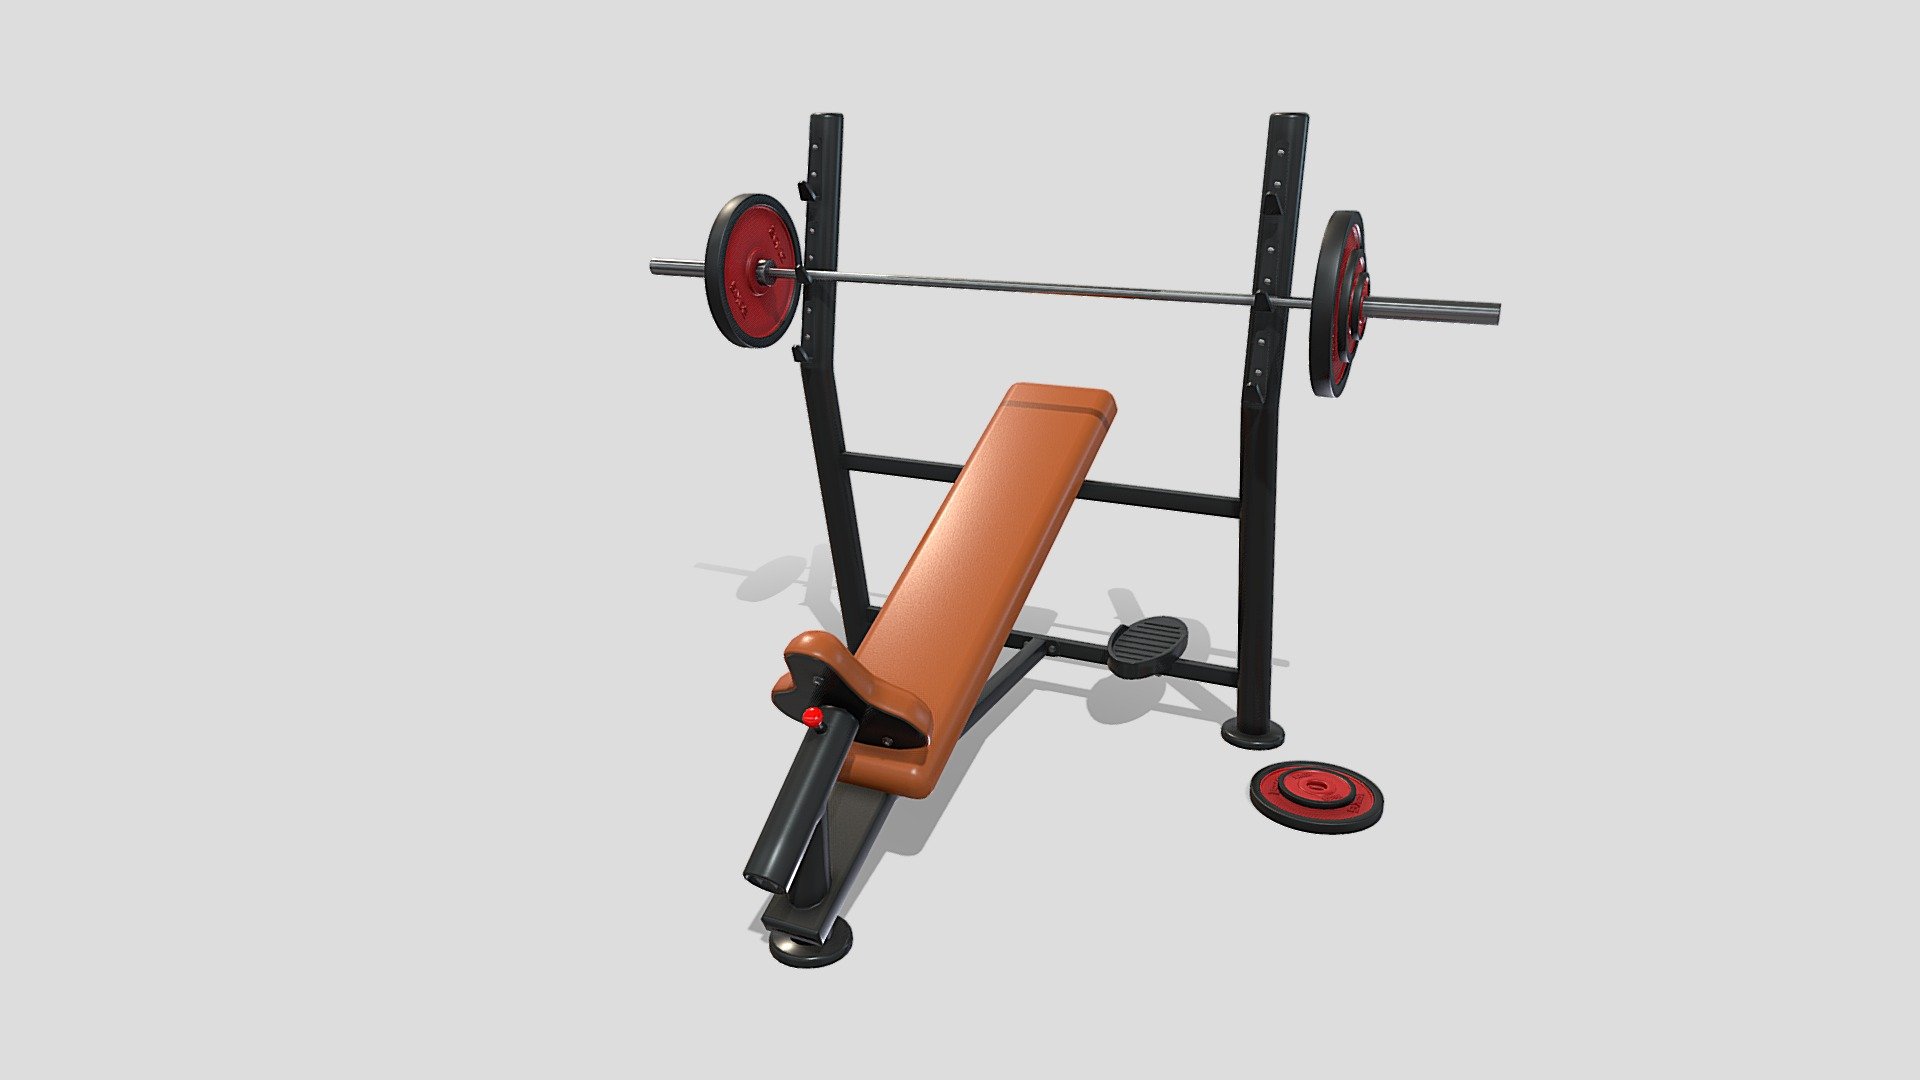 Gym machine 3d model built to real size, rendered with Cycles in Blender, as per seen on attached images. 

File formats:
-.blend, rendered with cycles, as seen in the images;
-.obj, with materials applied;
-.dae, with materials applied;
-.fbx, with materials applied;
-.stl;

Files come named appropriately and split by file format.

3D Software:
The 3D model was originally created in Blender 3.1 and rendered with Cycles.

Materials and textures:
The models have materials applied in all formats, and are ready to import and render.
Materials are image based using PBR, the model comes with four 4k png image textures for the rack, and four 1k textures for the disks.

Preview scenes:
The preview images are rendered in Blender using its built-in render engine &lsquo;Cycles'.
Note that the blend files come directly with the rendering scene included and the render command will generate the exact result as seen in previews.

General:
The models are built mostly out of quads.
The disks and bar are separate objects 3d model